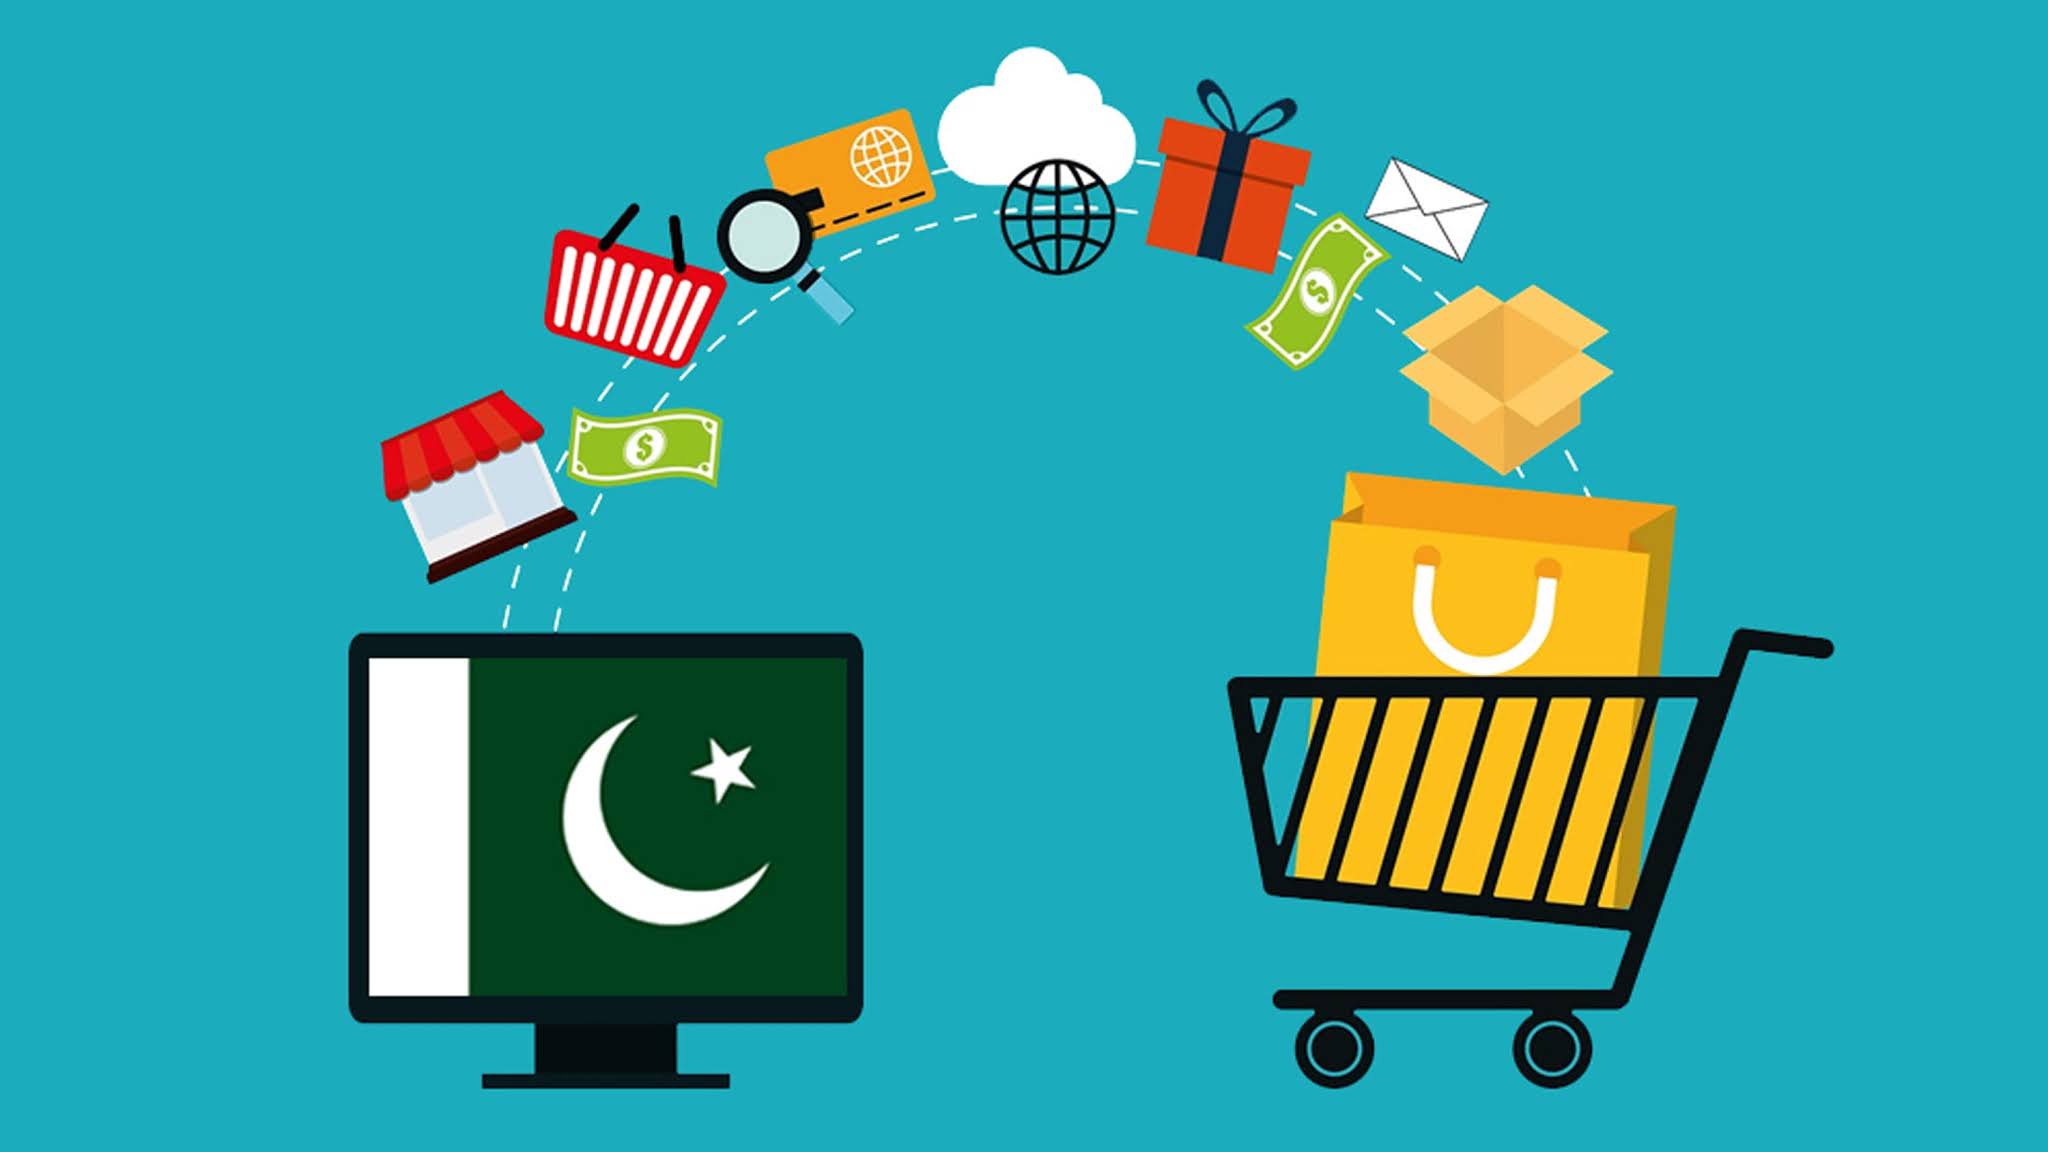 BUSINESS REPORT: Pakistan to cross Rs. 100 billion eCommerce trade in 2021